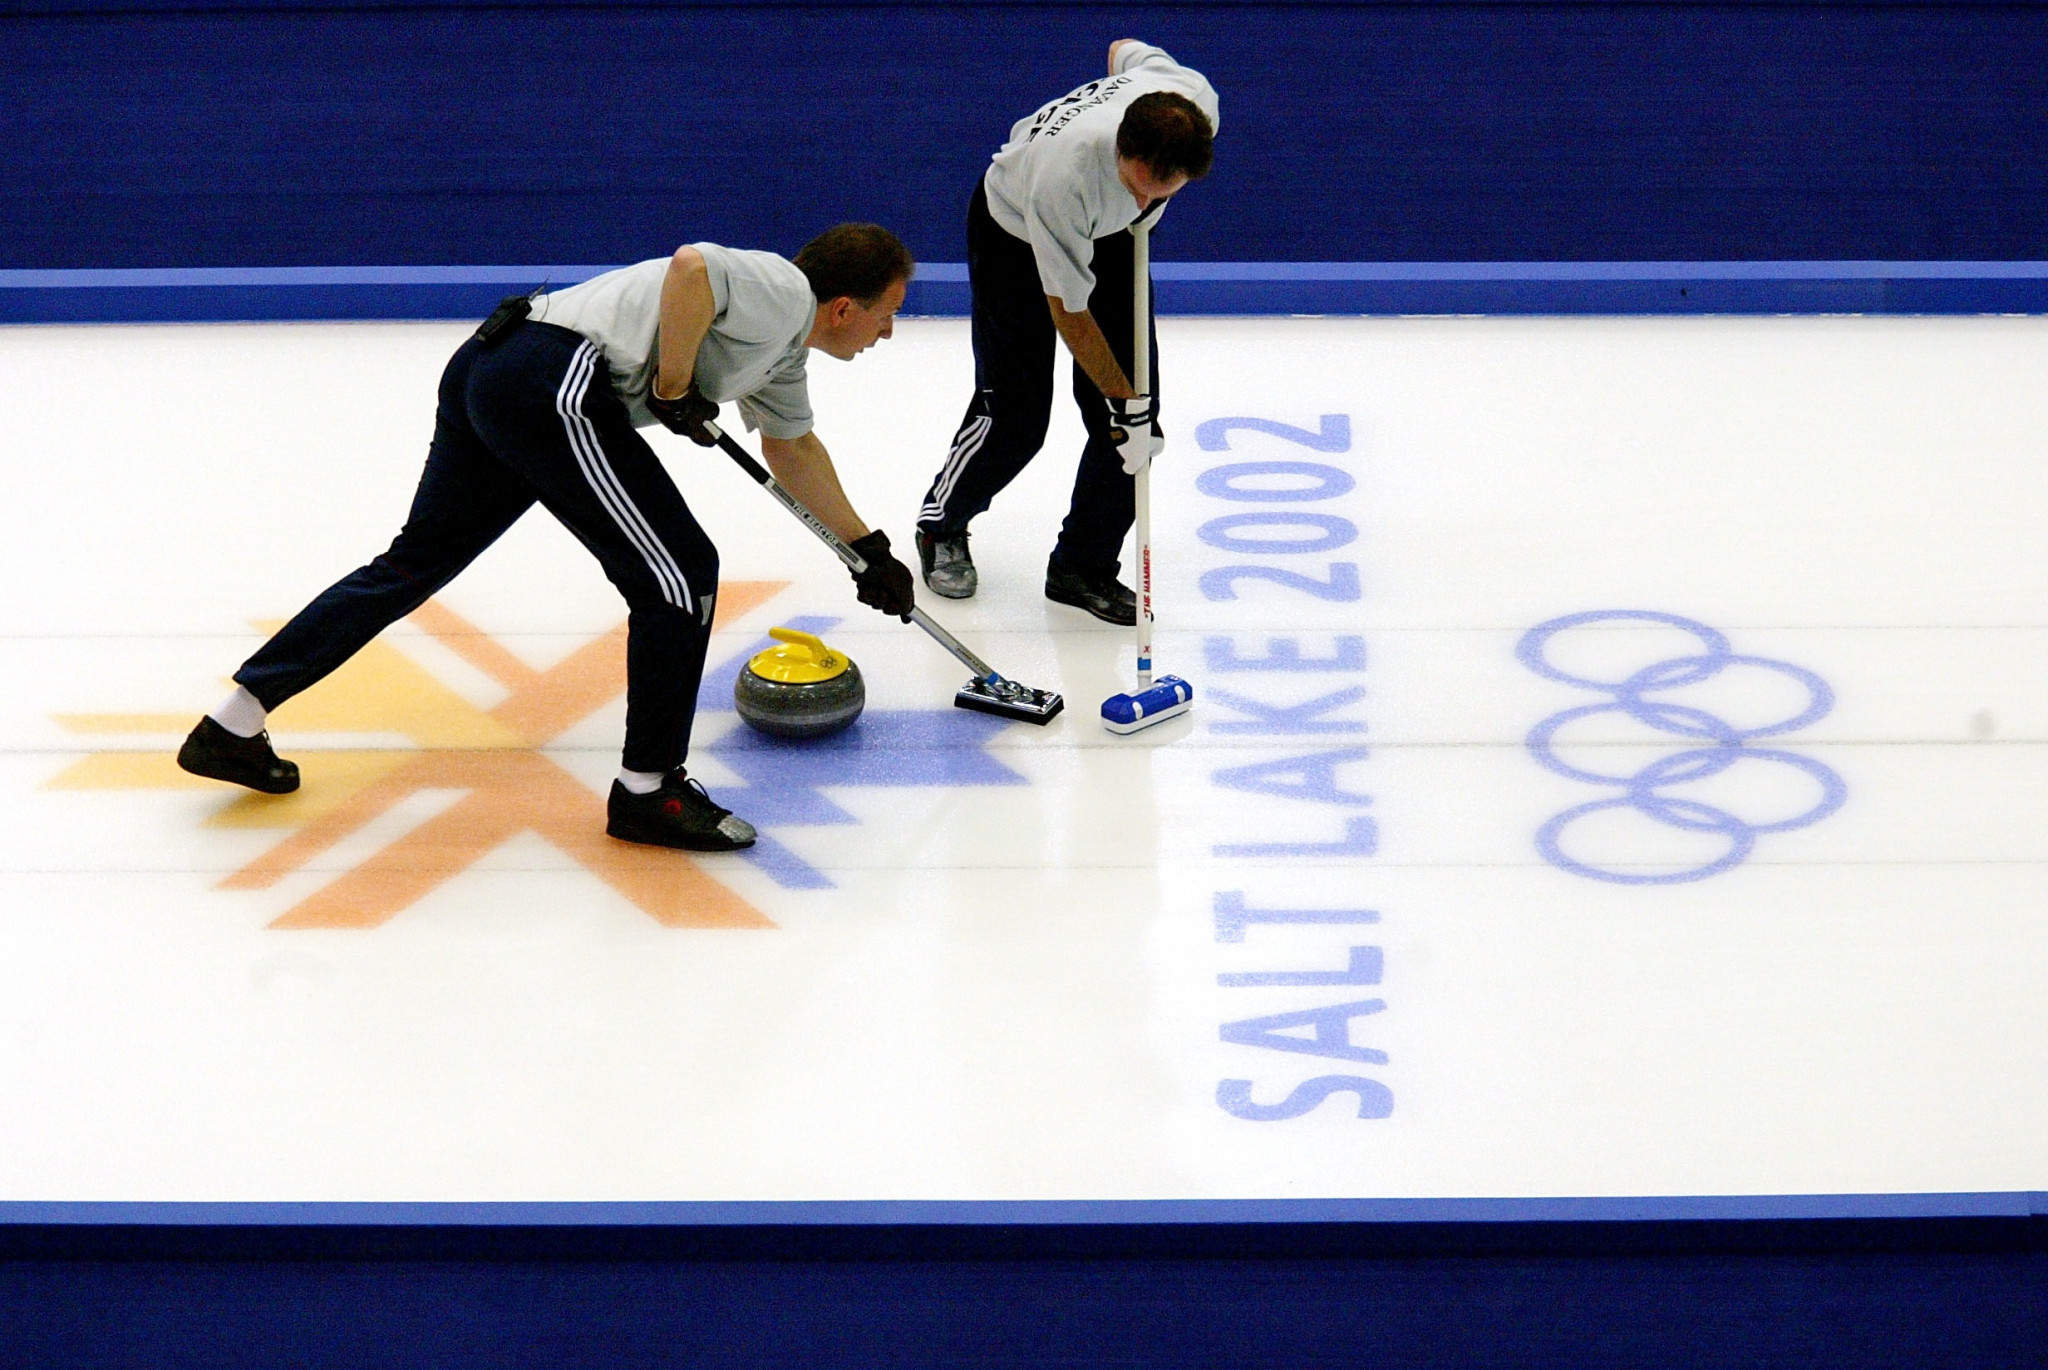 Keith Wendorf has been with the WCF since the 2002 Winter Olympic Games in Salt Lake City ©Getty Images